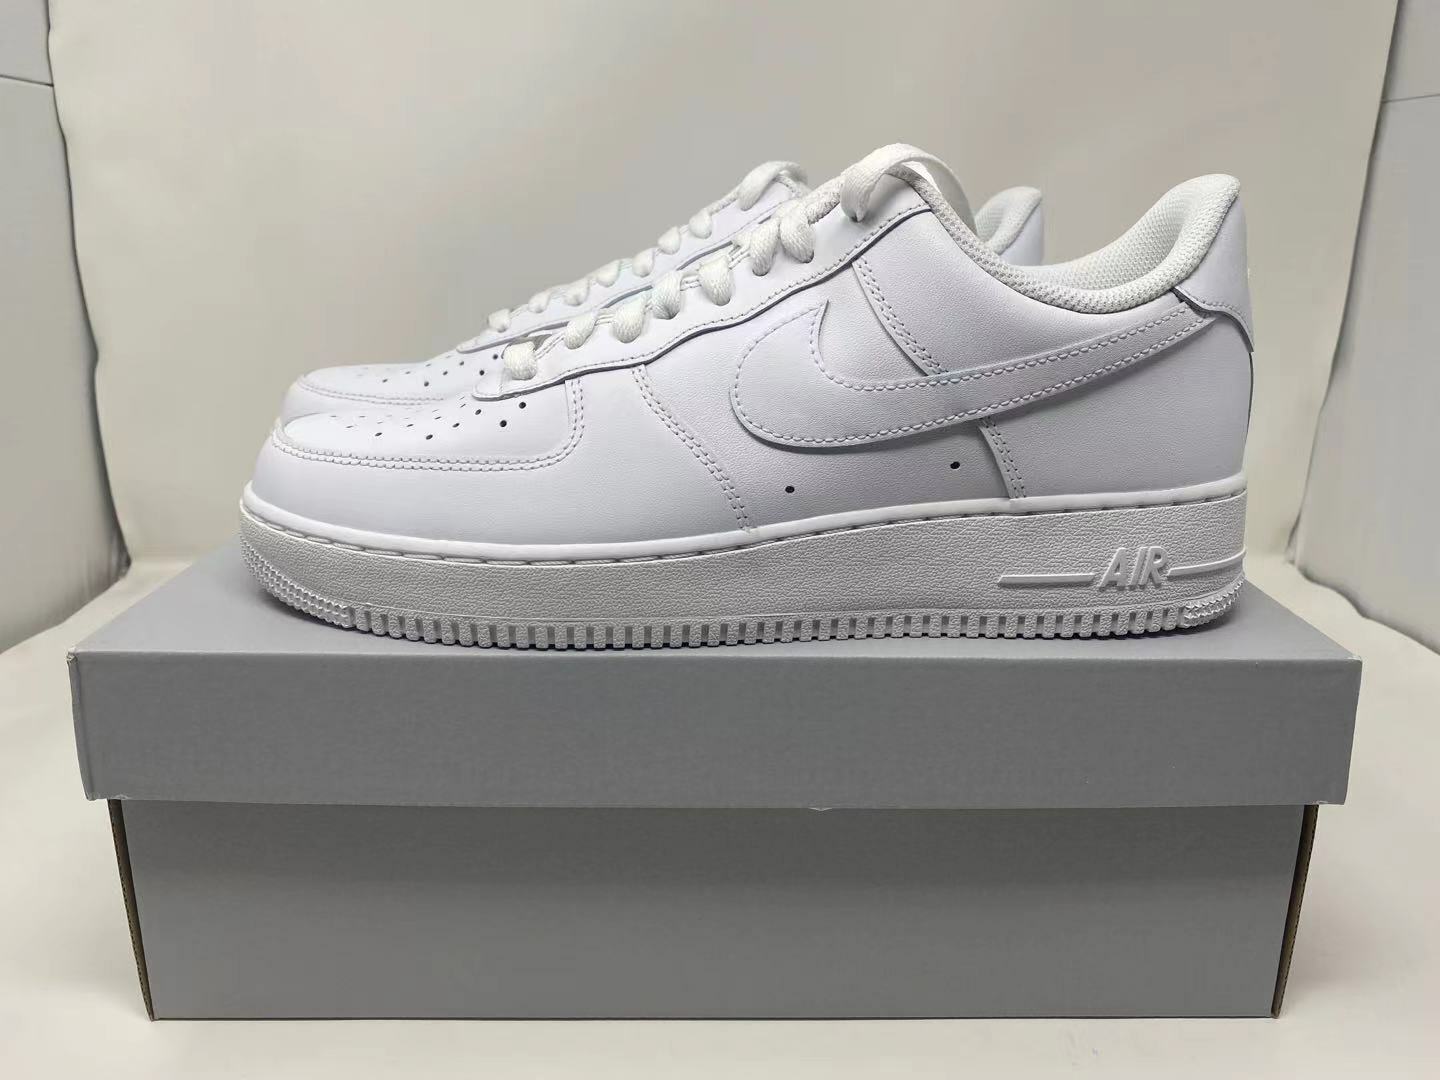 Nike Air Force 1 \'07 Low Men’s Triple White  ALL SIZES  6 to 15  New  CW2288-111